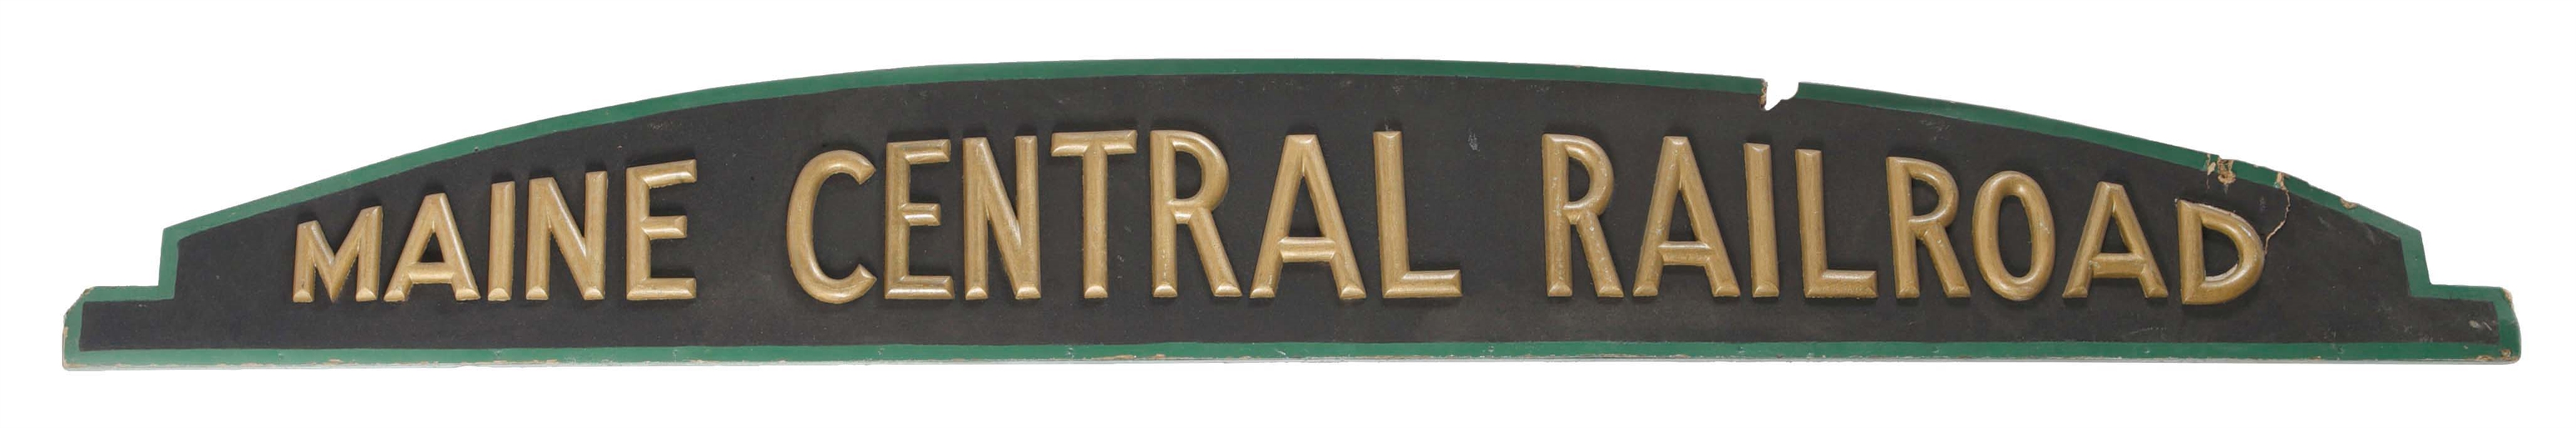 MAINE CENTRAL RAILROAD CRESTED SIGN.